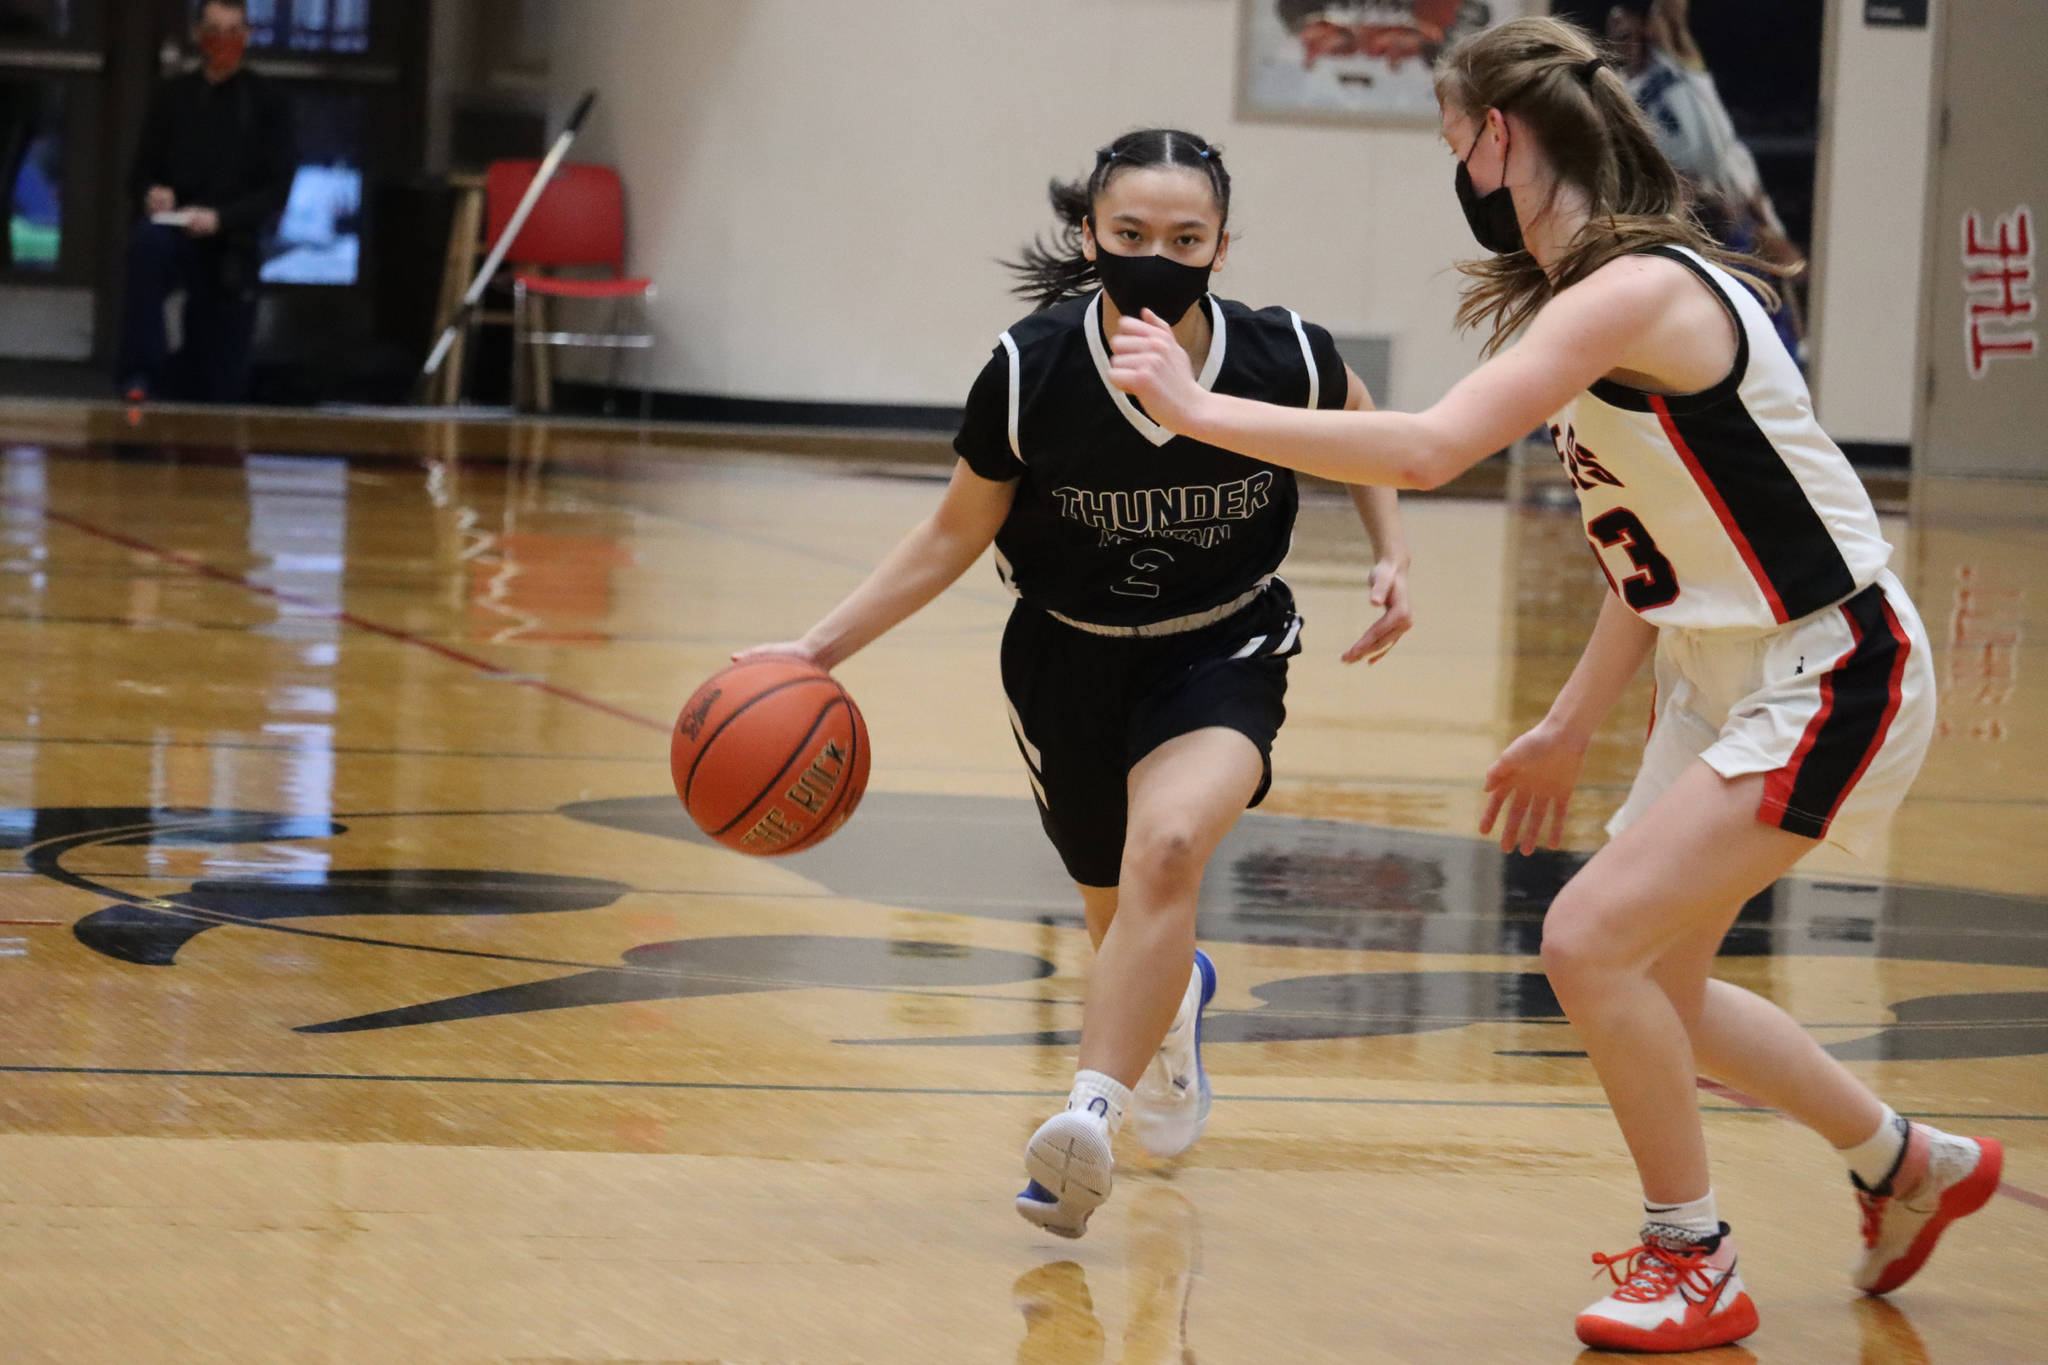 Thunder Mountain High School’s Mary Khaye Gacia (2) dribbles toward Juneau-Douglas High School: Yadaa.at Kalé’s Skylar Tuckwood (13) during a 46-41 TMHS victory. It took four quarters and two overtime periods to determine which team would go on to face Ketchikan High School in Ketchikan. (Ben Hohenstatt / Juneau Empire)